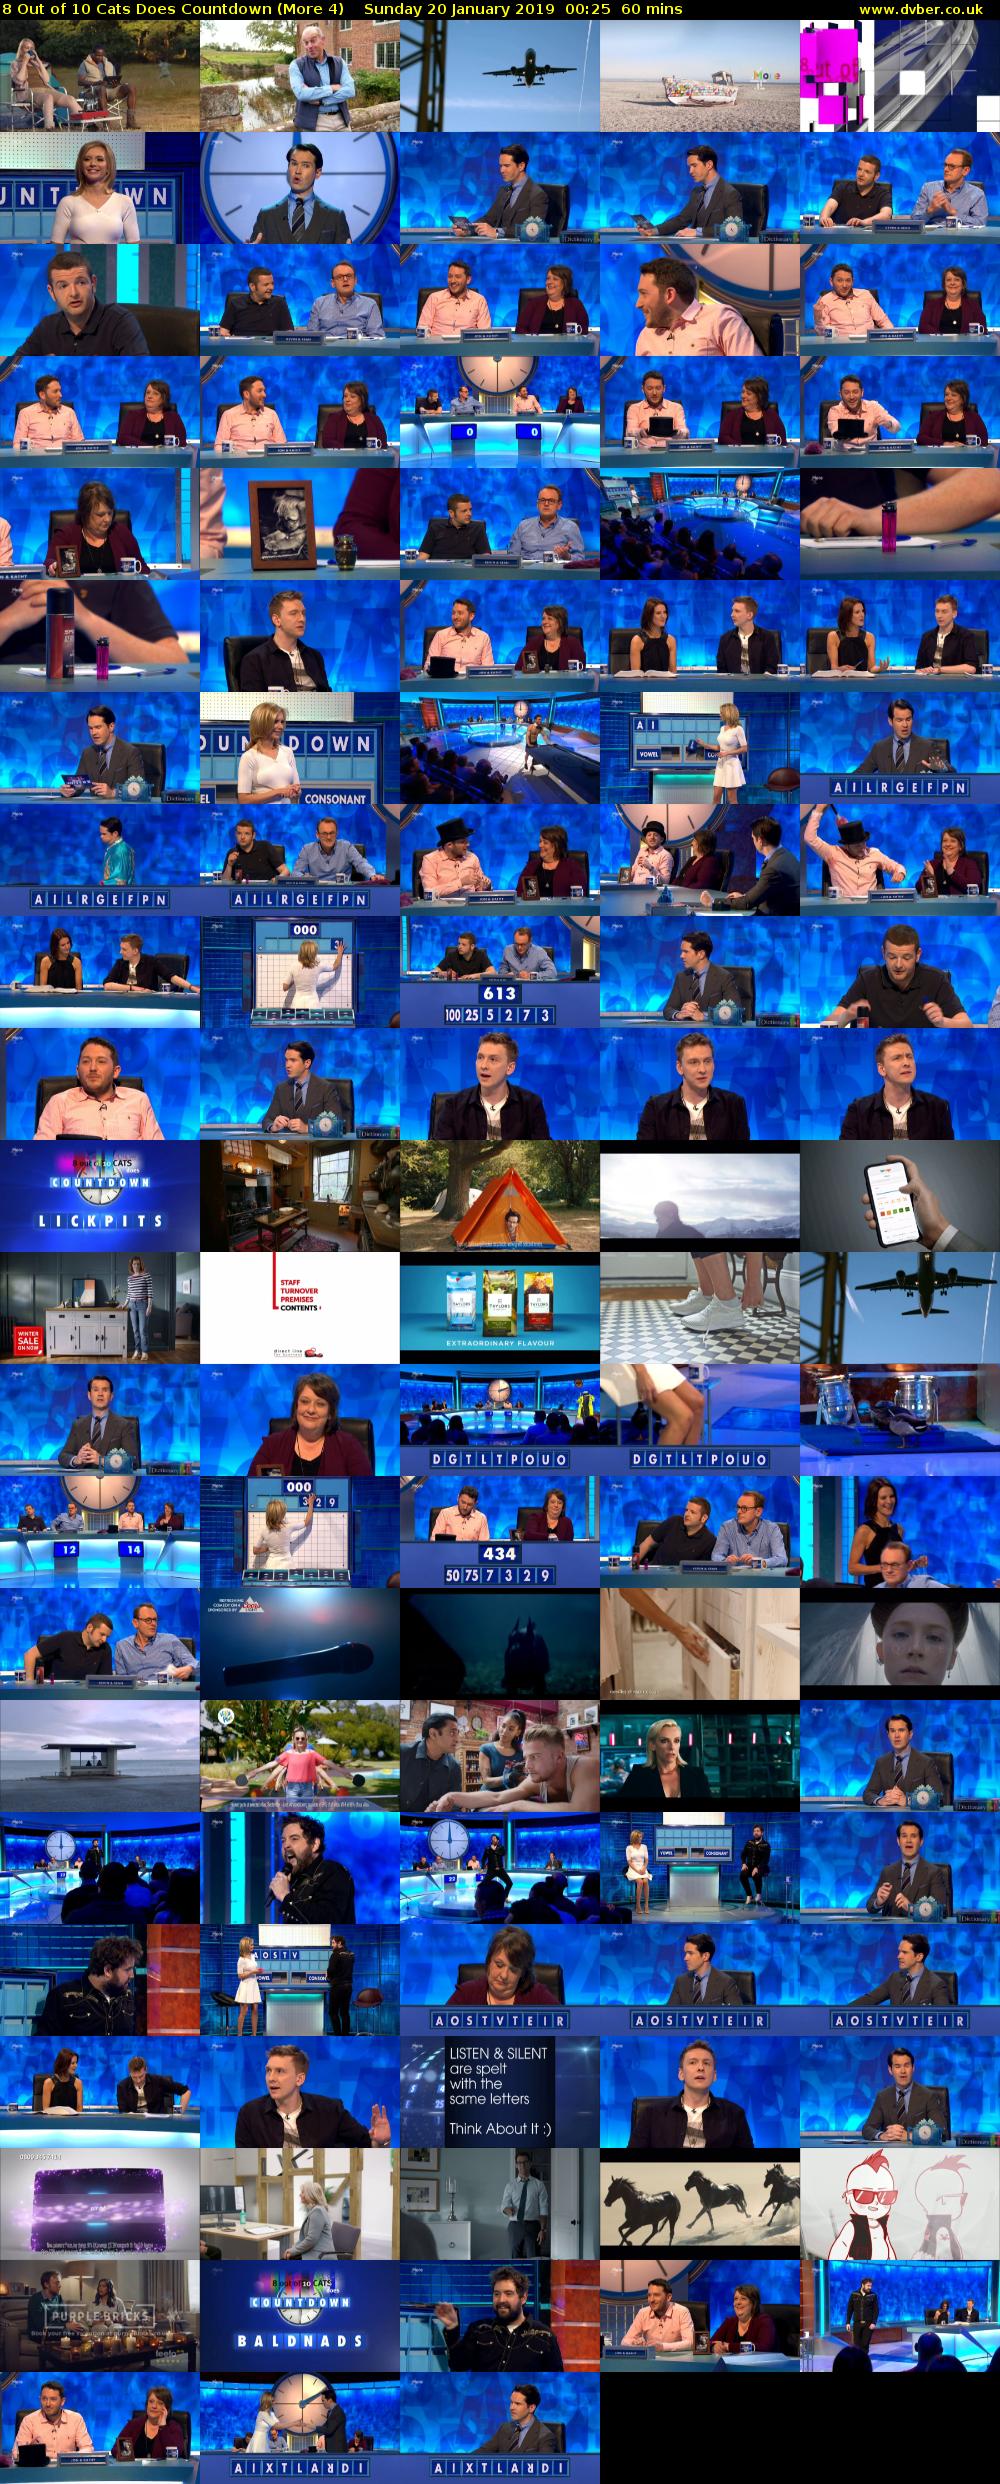 8 Out of 10 Cats Does Countdown (More 4) Sunday 20 January 2019 00:25 - 01:25